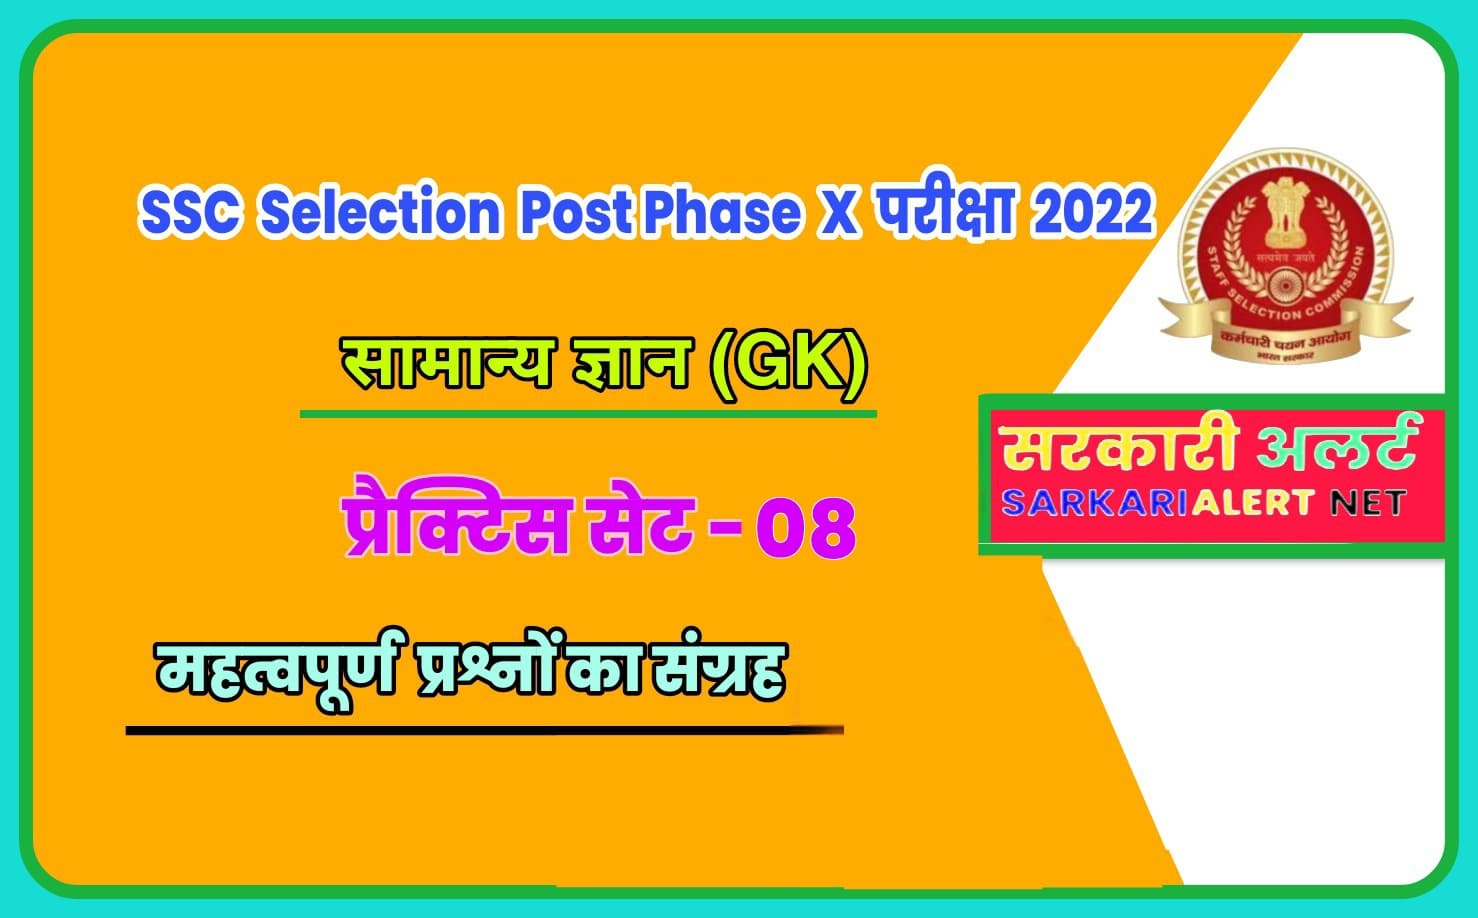 SSC Selection Post Phase X General knowledge Practice Set 08